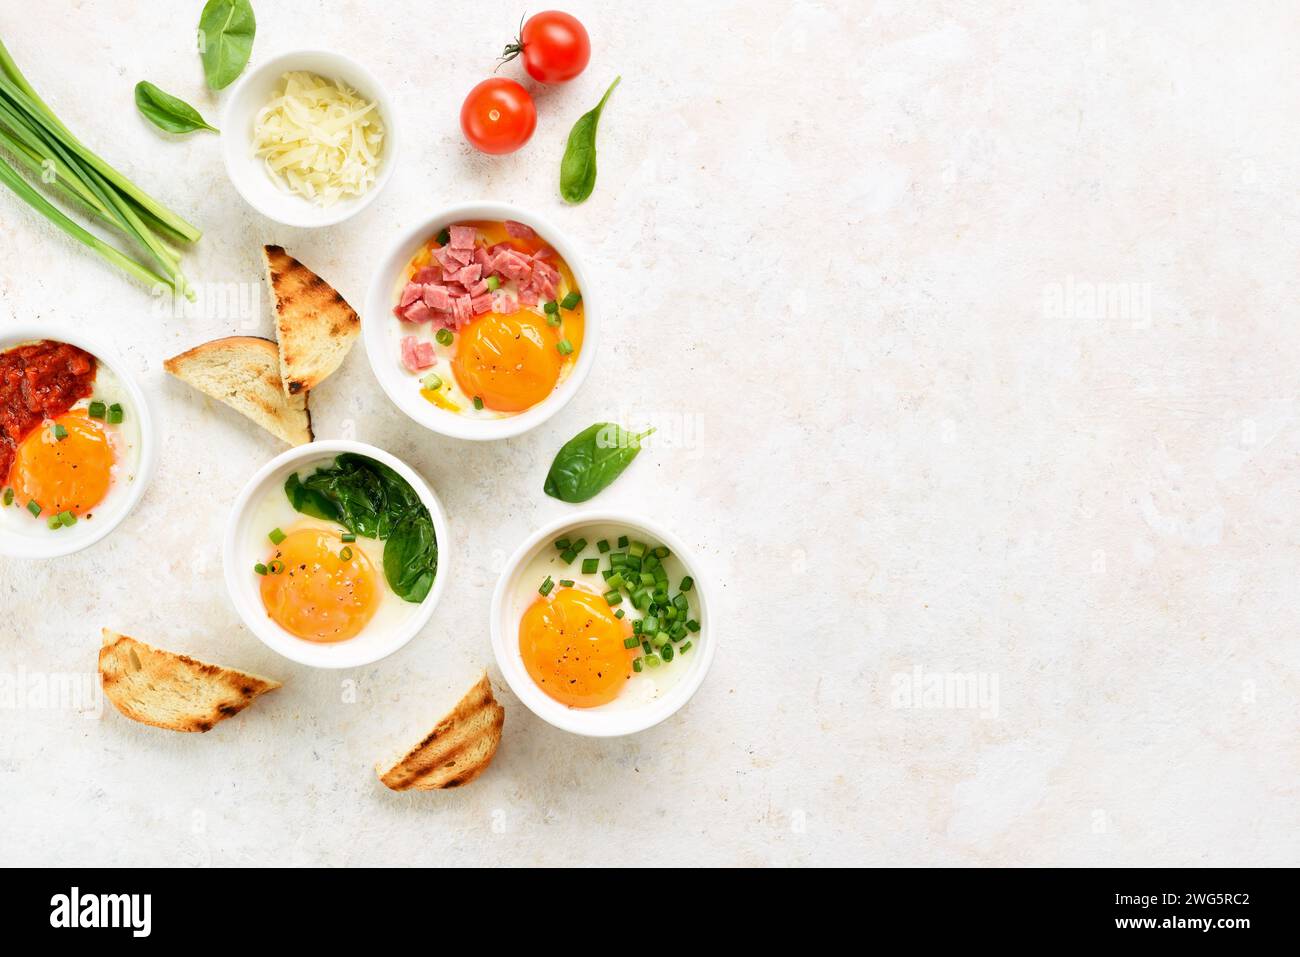 Eggs en cocotte (baked eggs) in portion ceramic bowl over light background with free space. Healthy morning food concept. Top view, flat lay Stock Photo